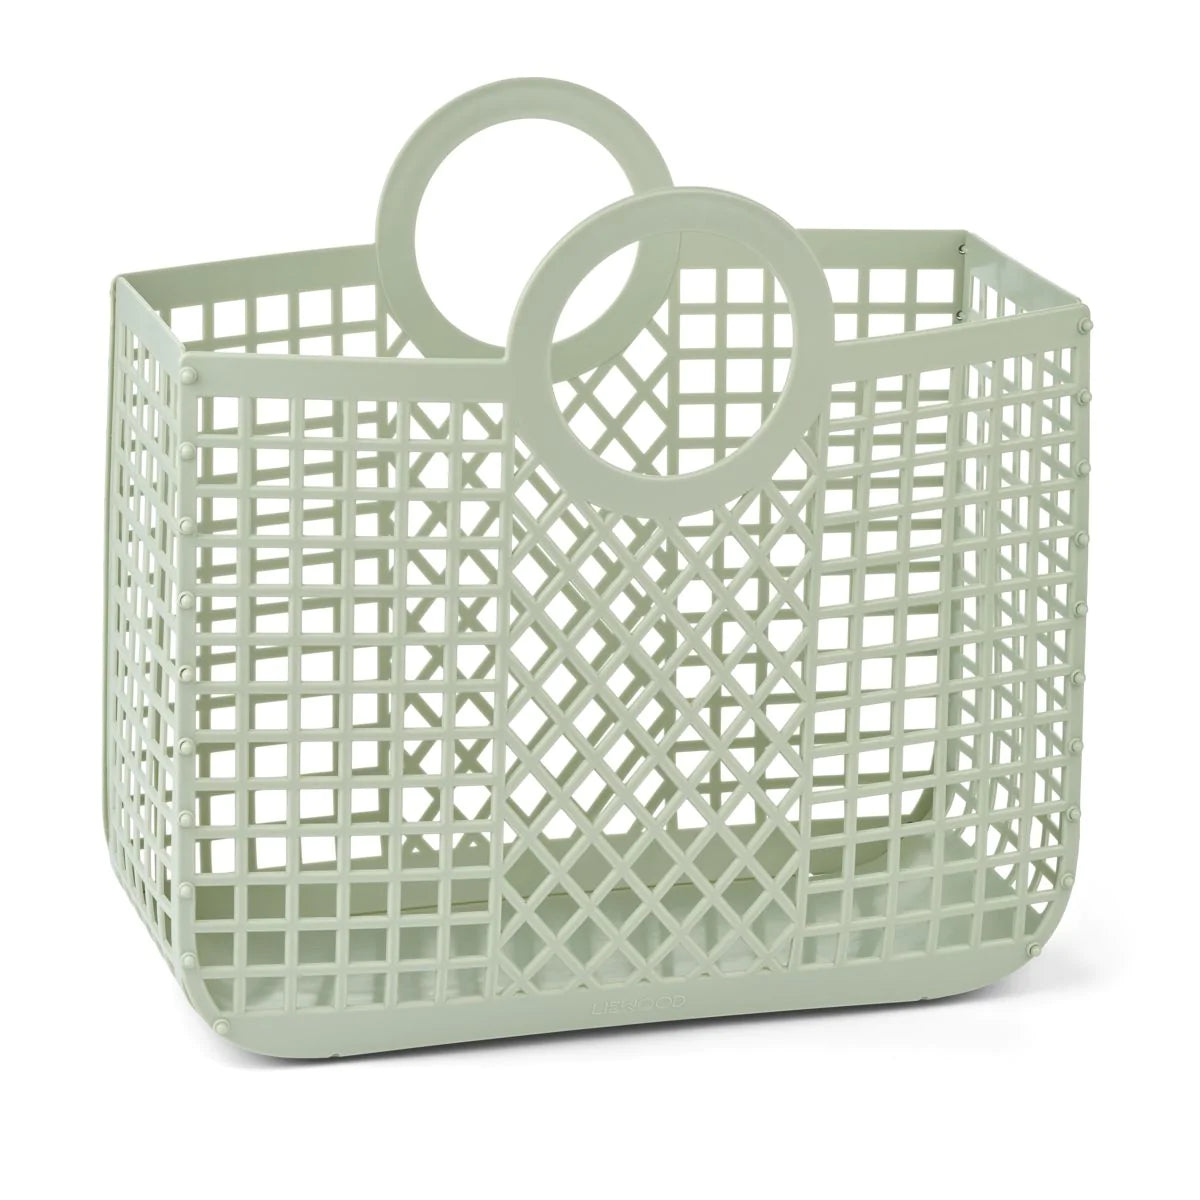 The Liewood Samantha Basket is the perfect accessory for your little one to carry around their favourite possessions.